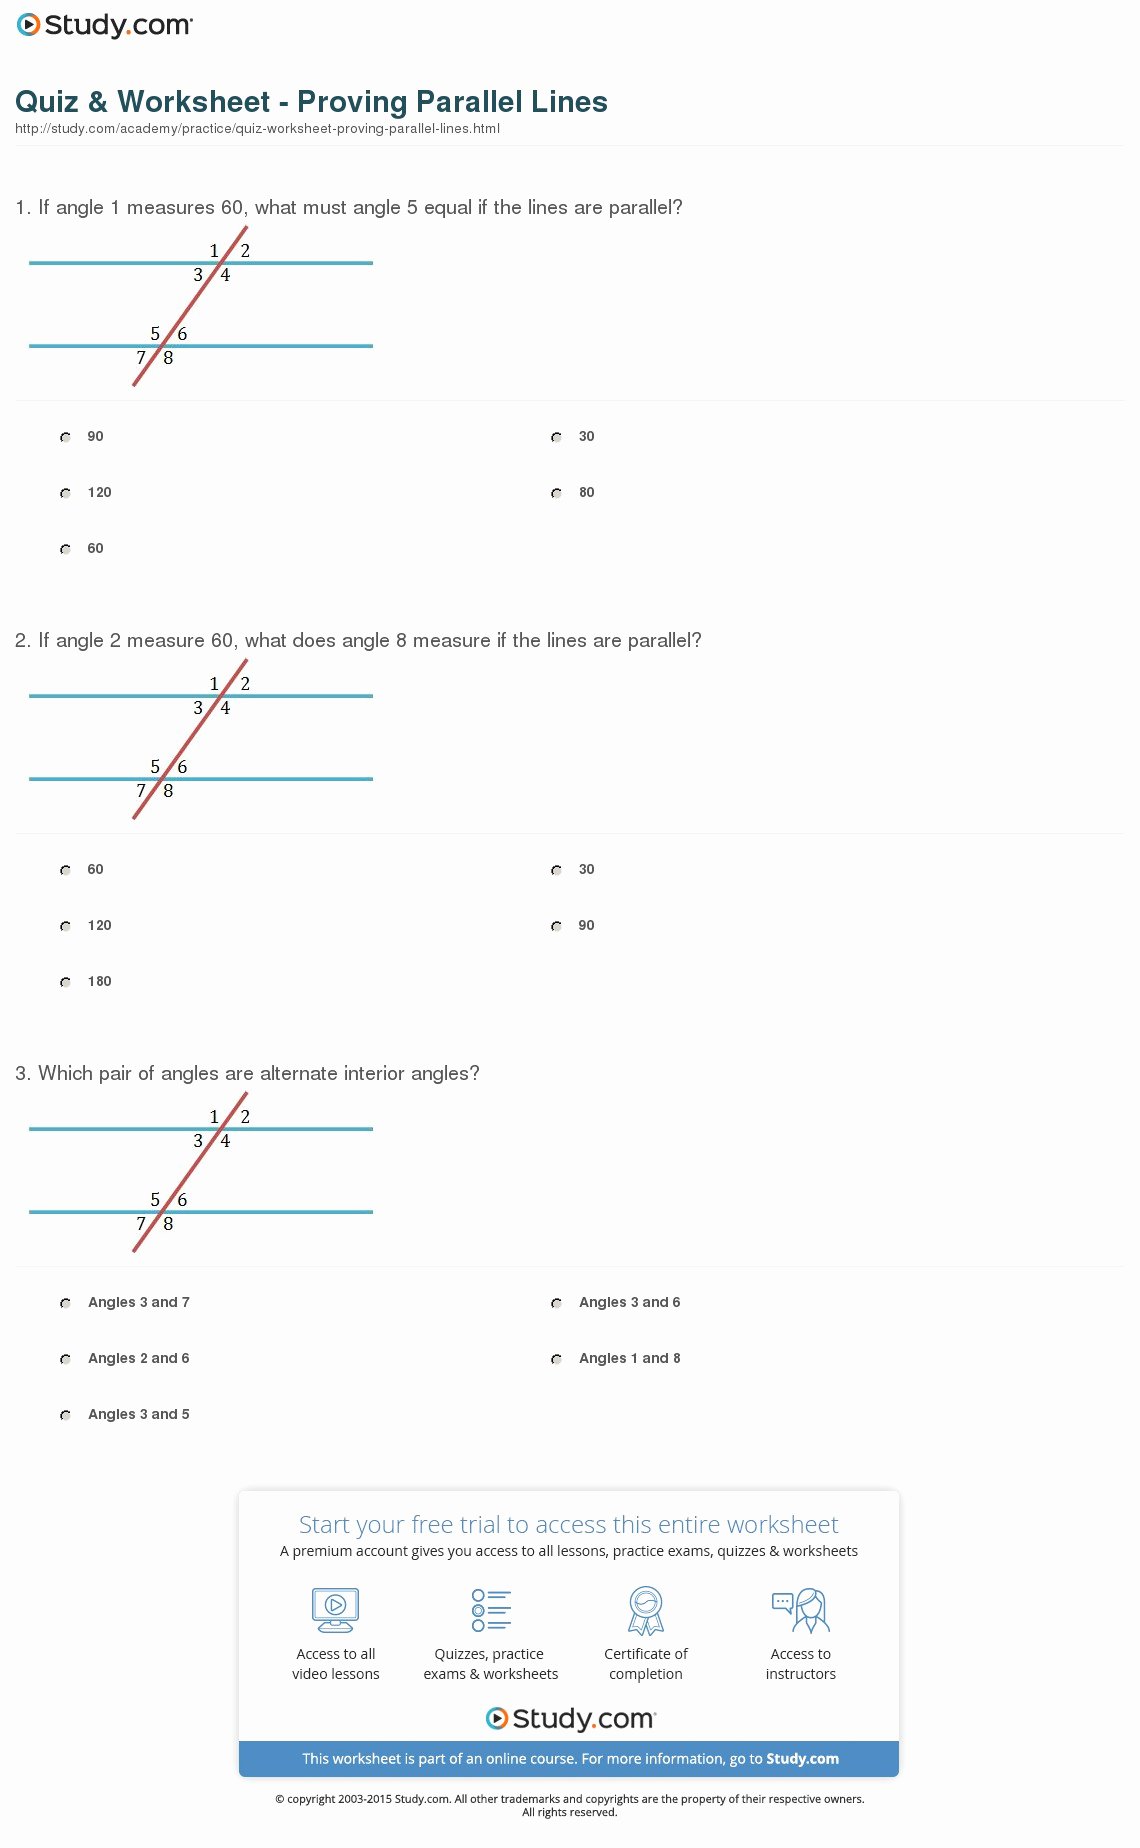 Proving Lines Parallel Worksheet Answers Fresh Quiz &amp; Worksheet Proving Parallel Lines